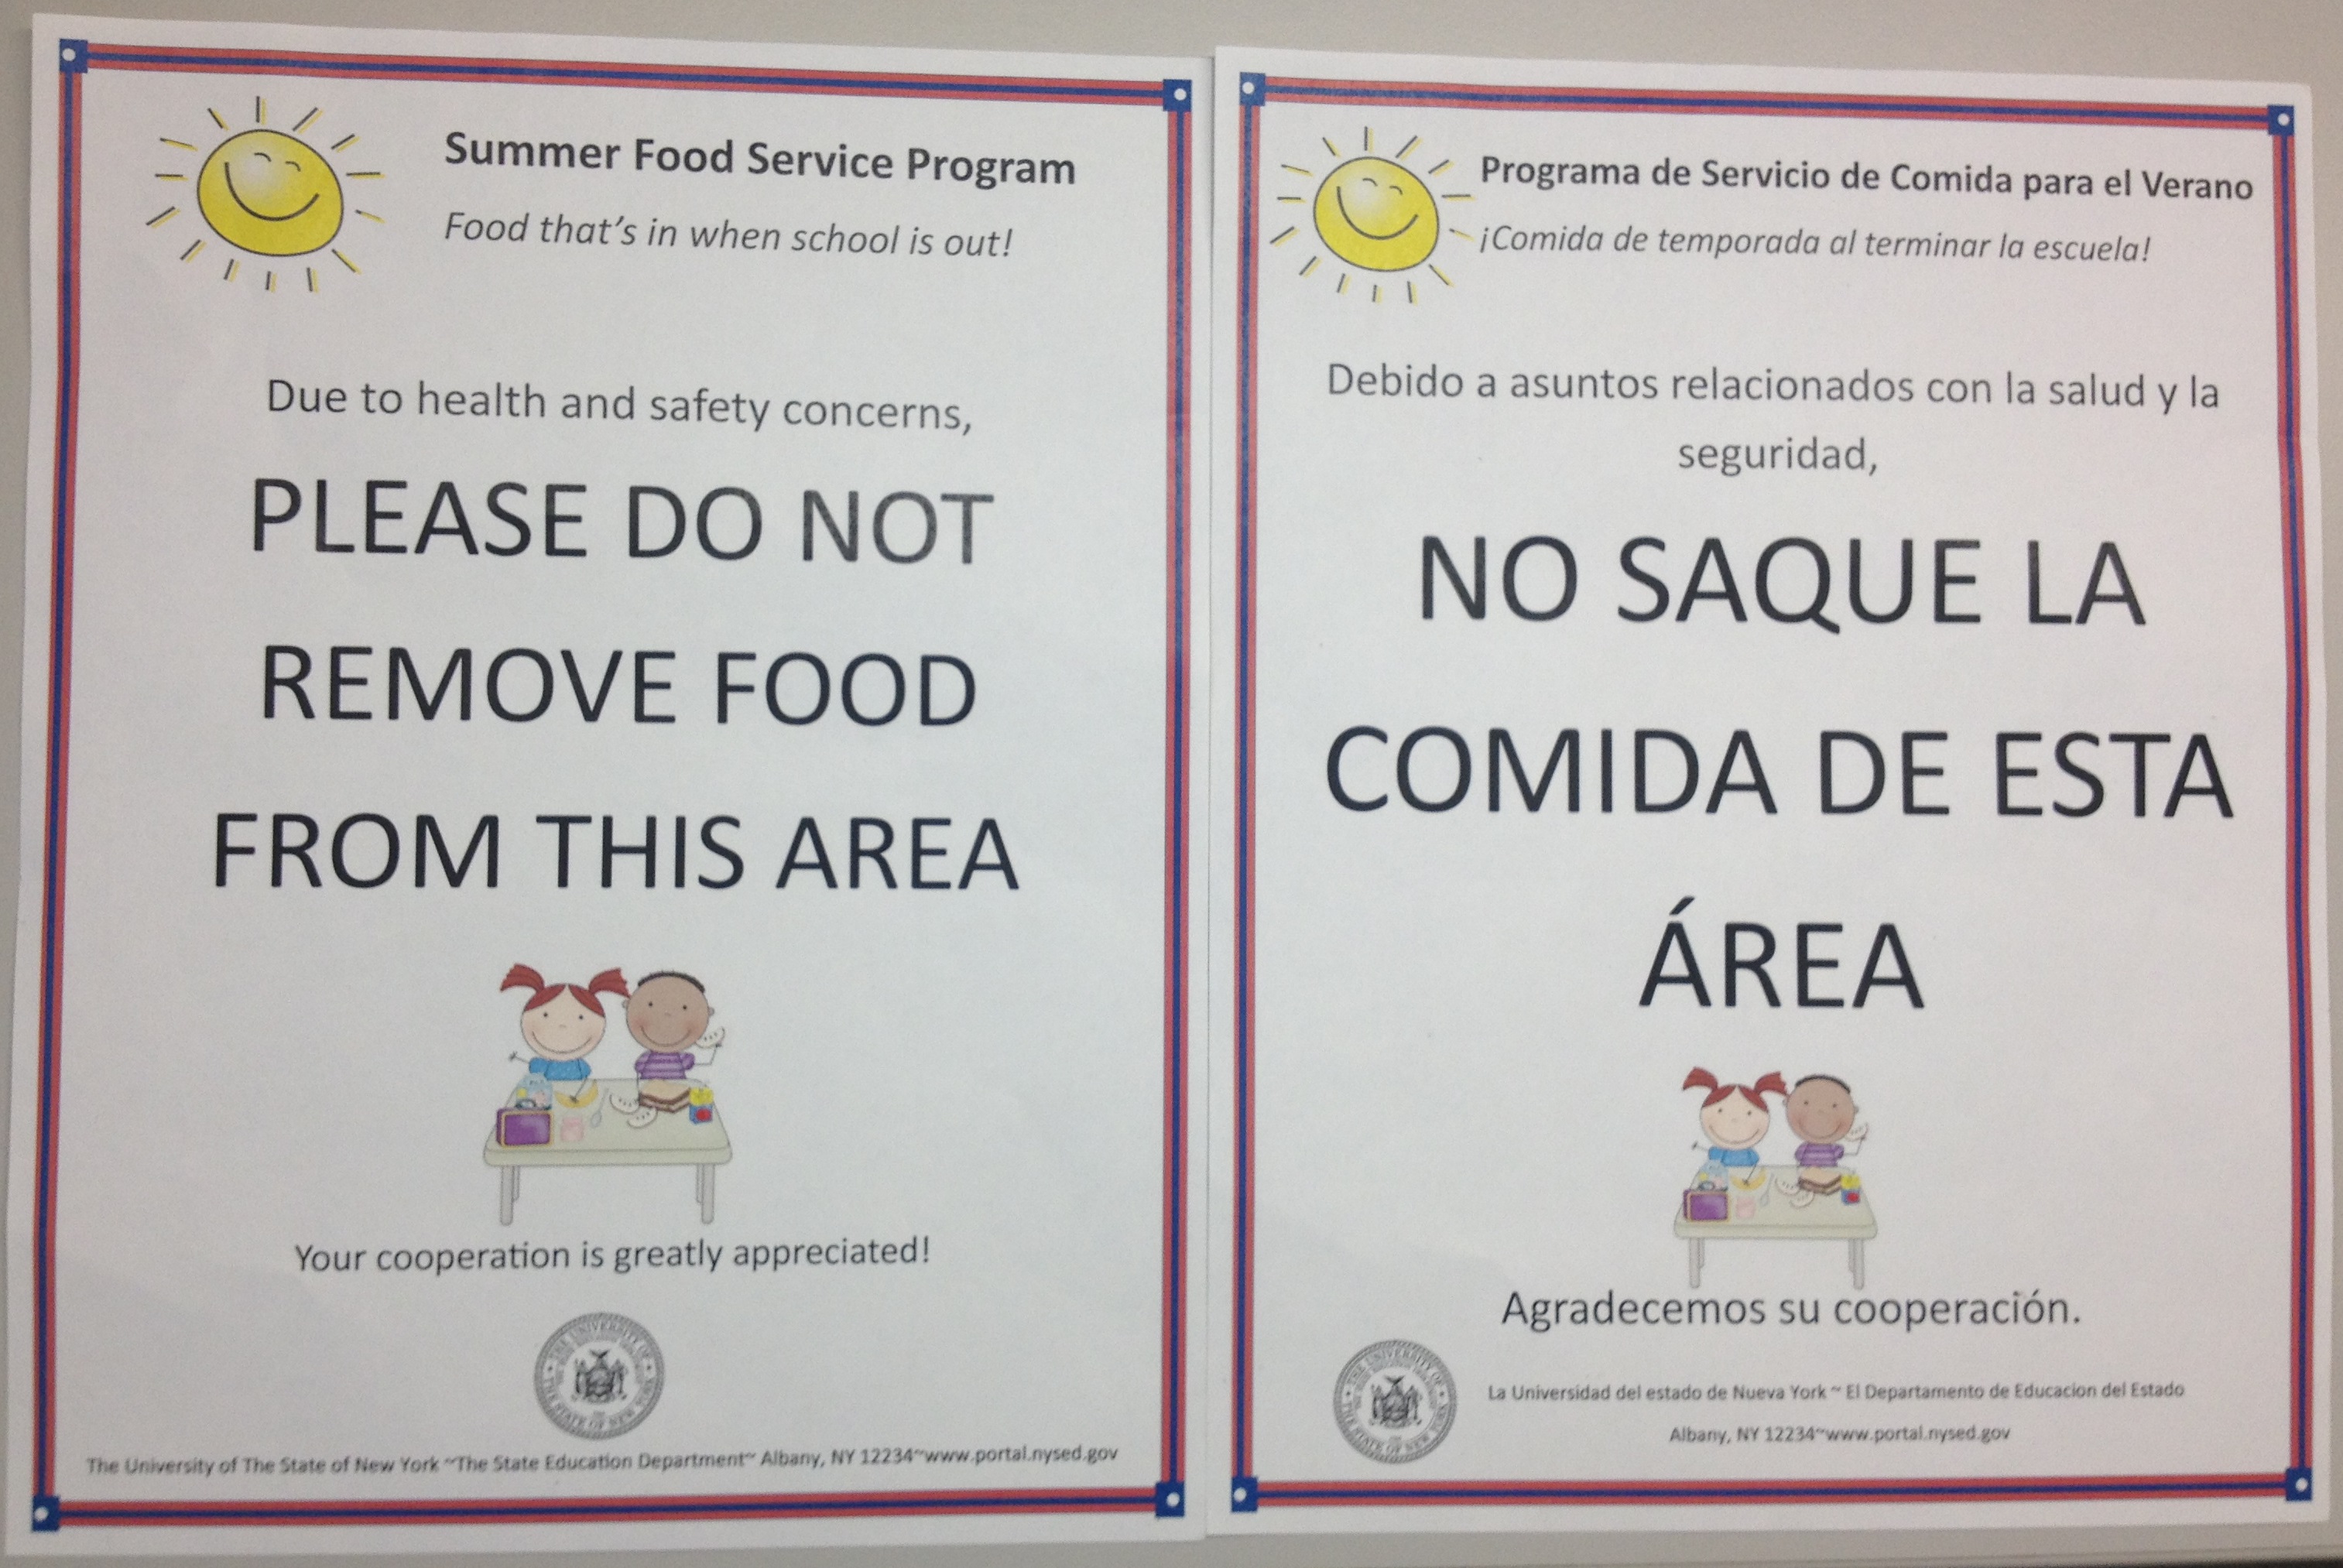 English and  Spanish version of: Summer Food Service Program; Food that's in when school is out!; Due to health and safety concerns, please do not remove food from this area; Your cooperation is greatly appreciated!